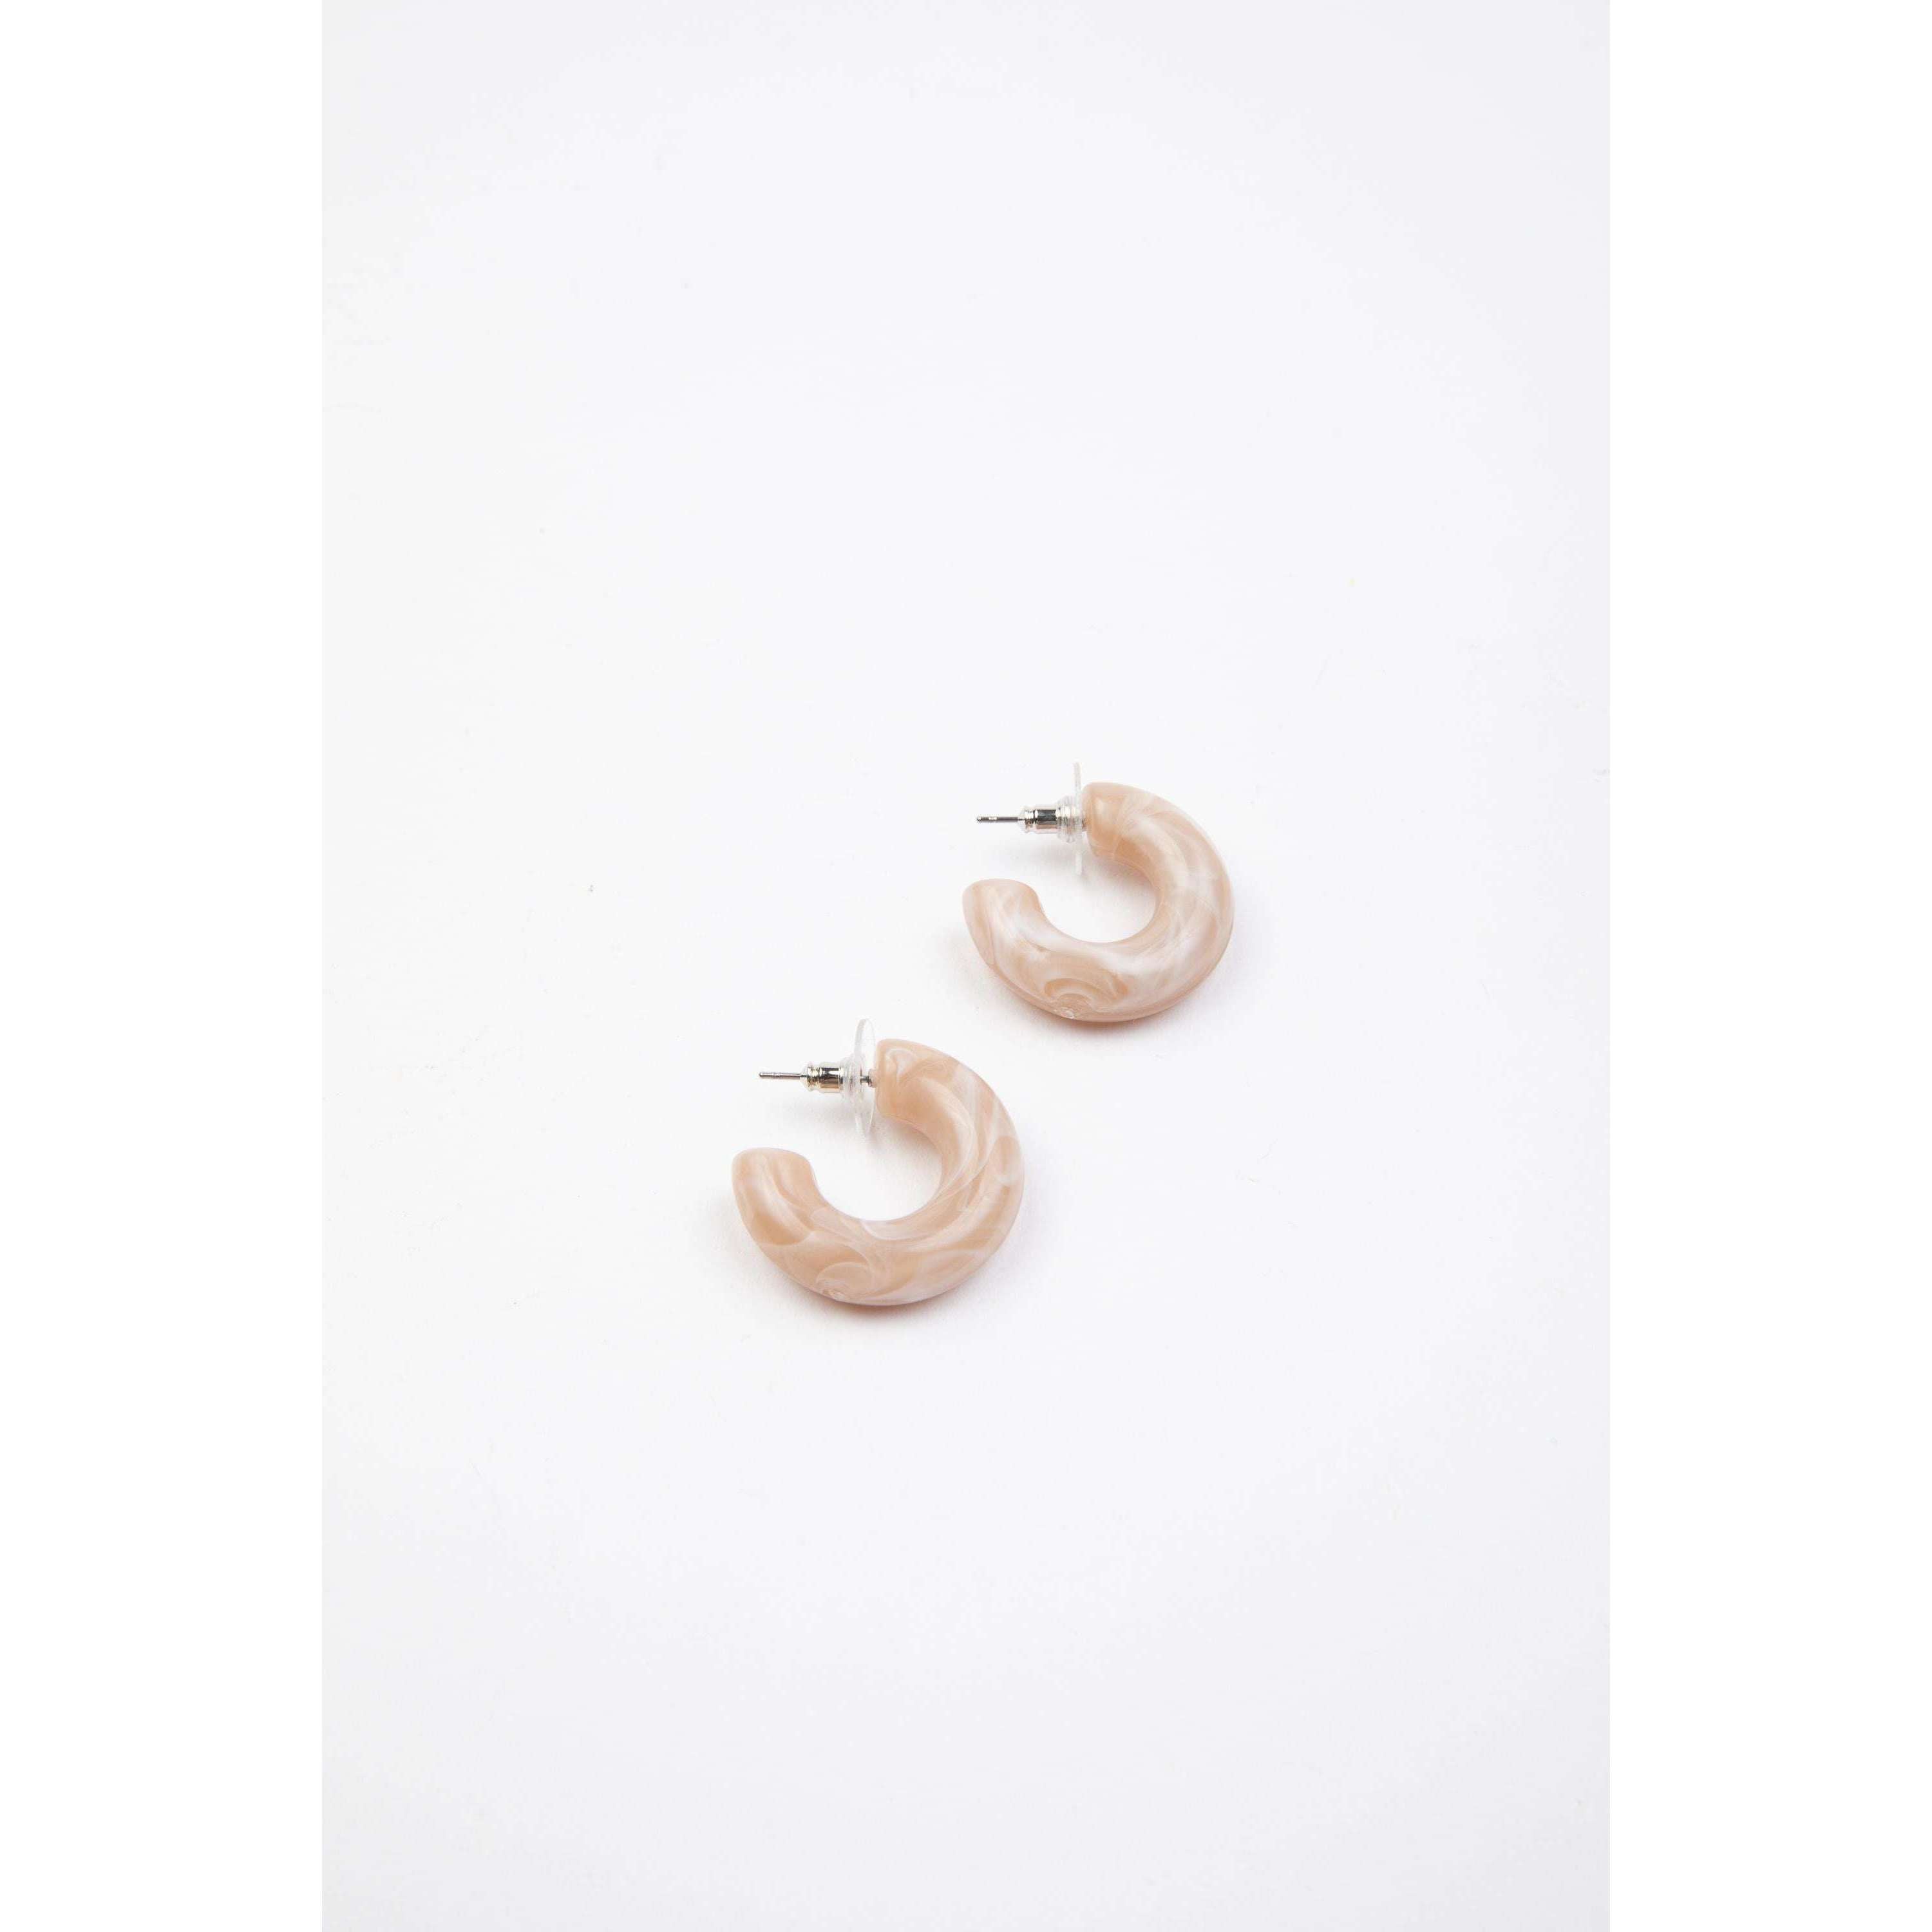 Impodimo Living & Giving:Constance Earrings:Holiday Trading & Co:Stone